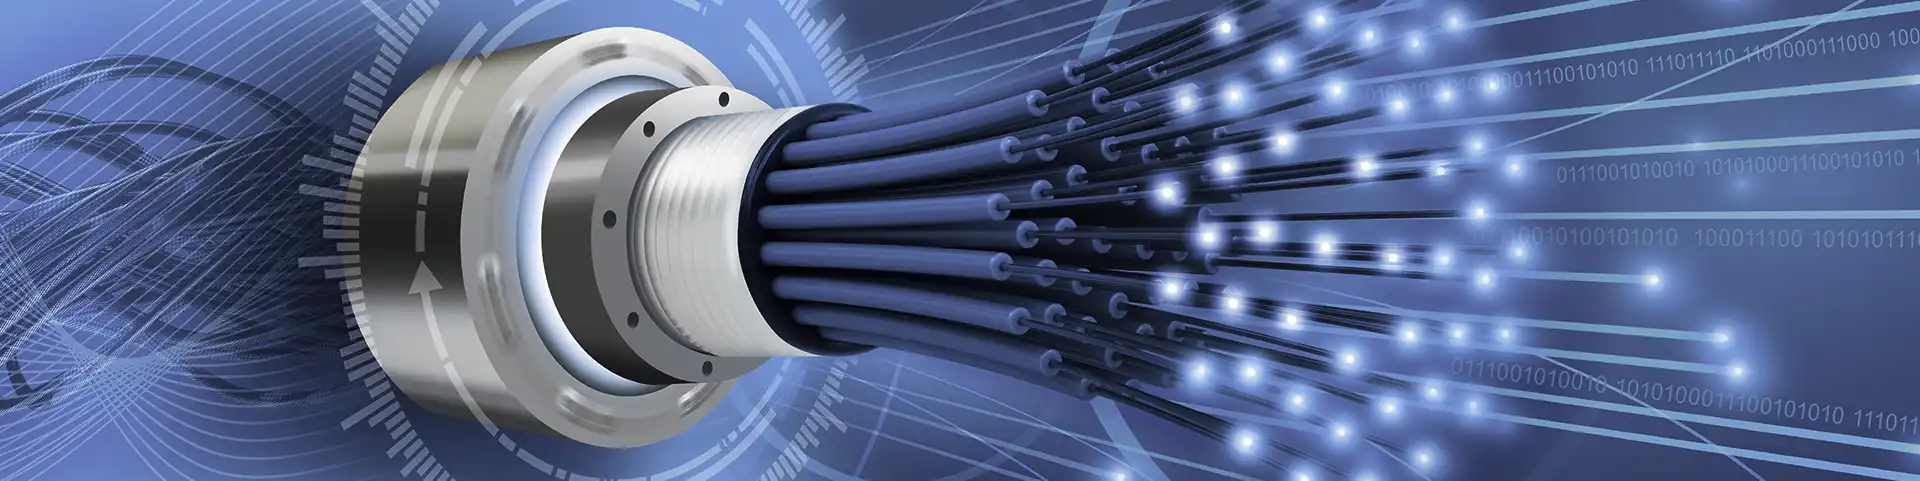 Fiber Optic Rotary Joints for high speed date transmission